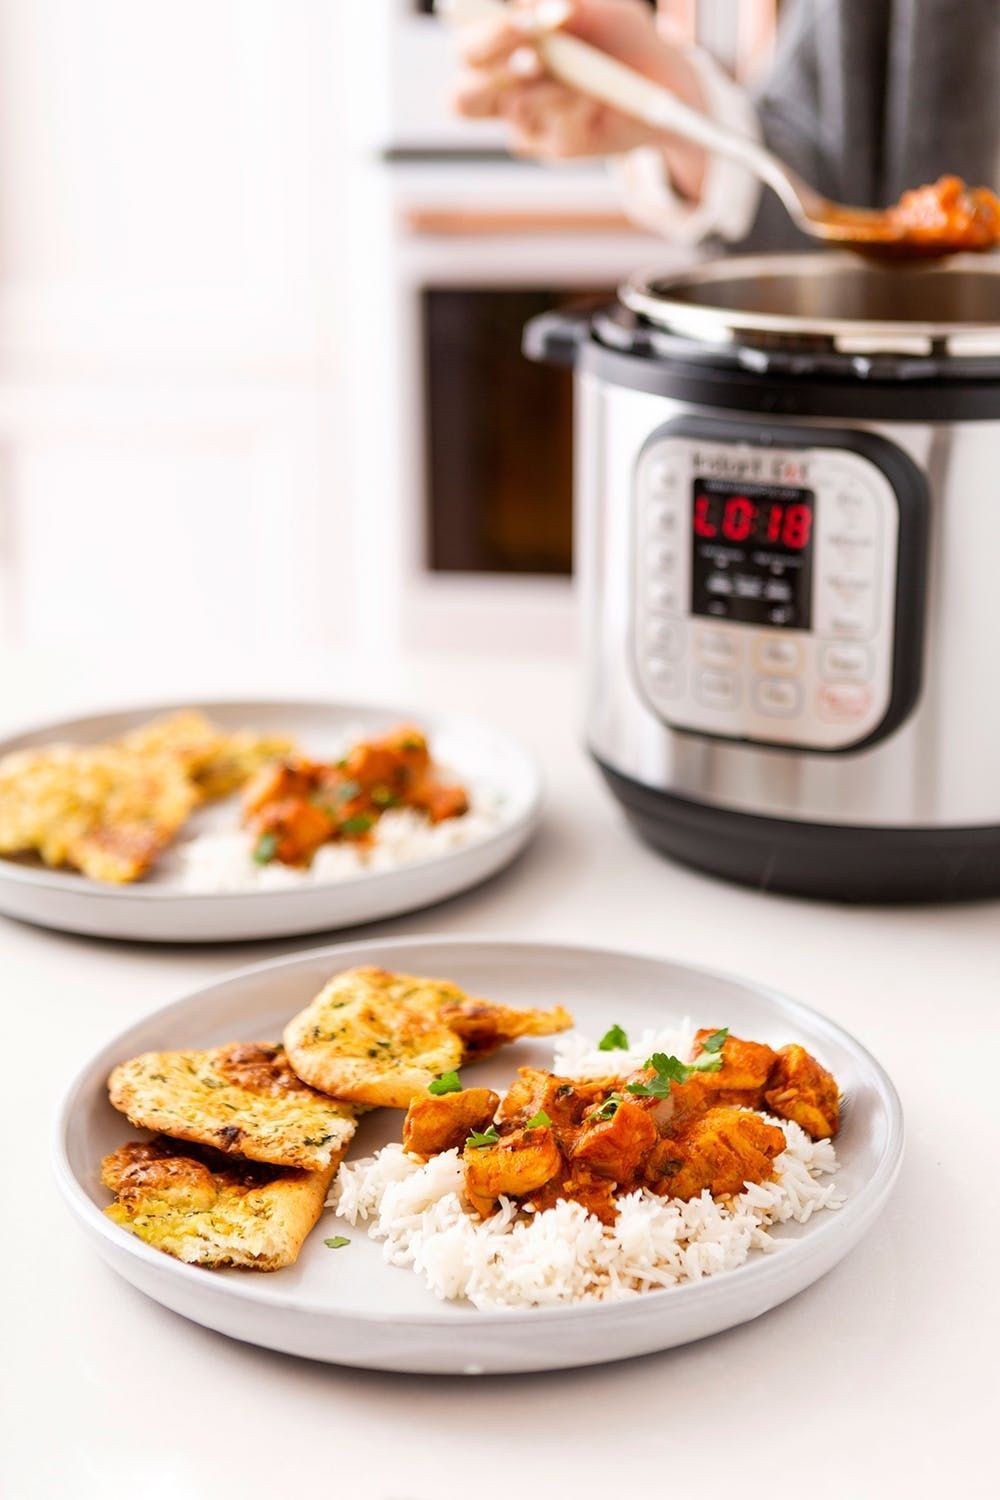 Pressure Cooker Archives - The Magical Slow Cooker